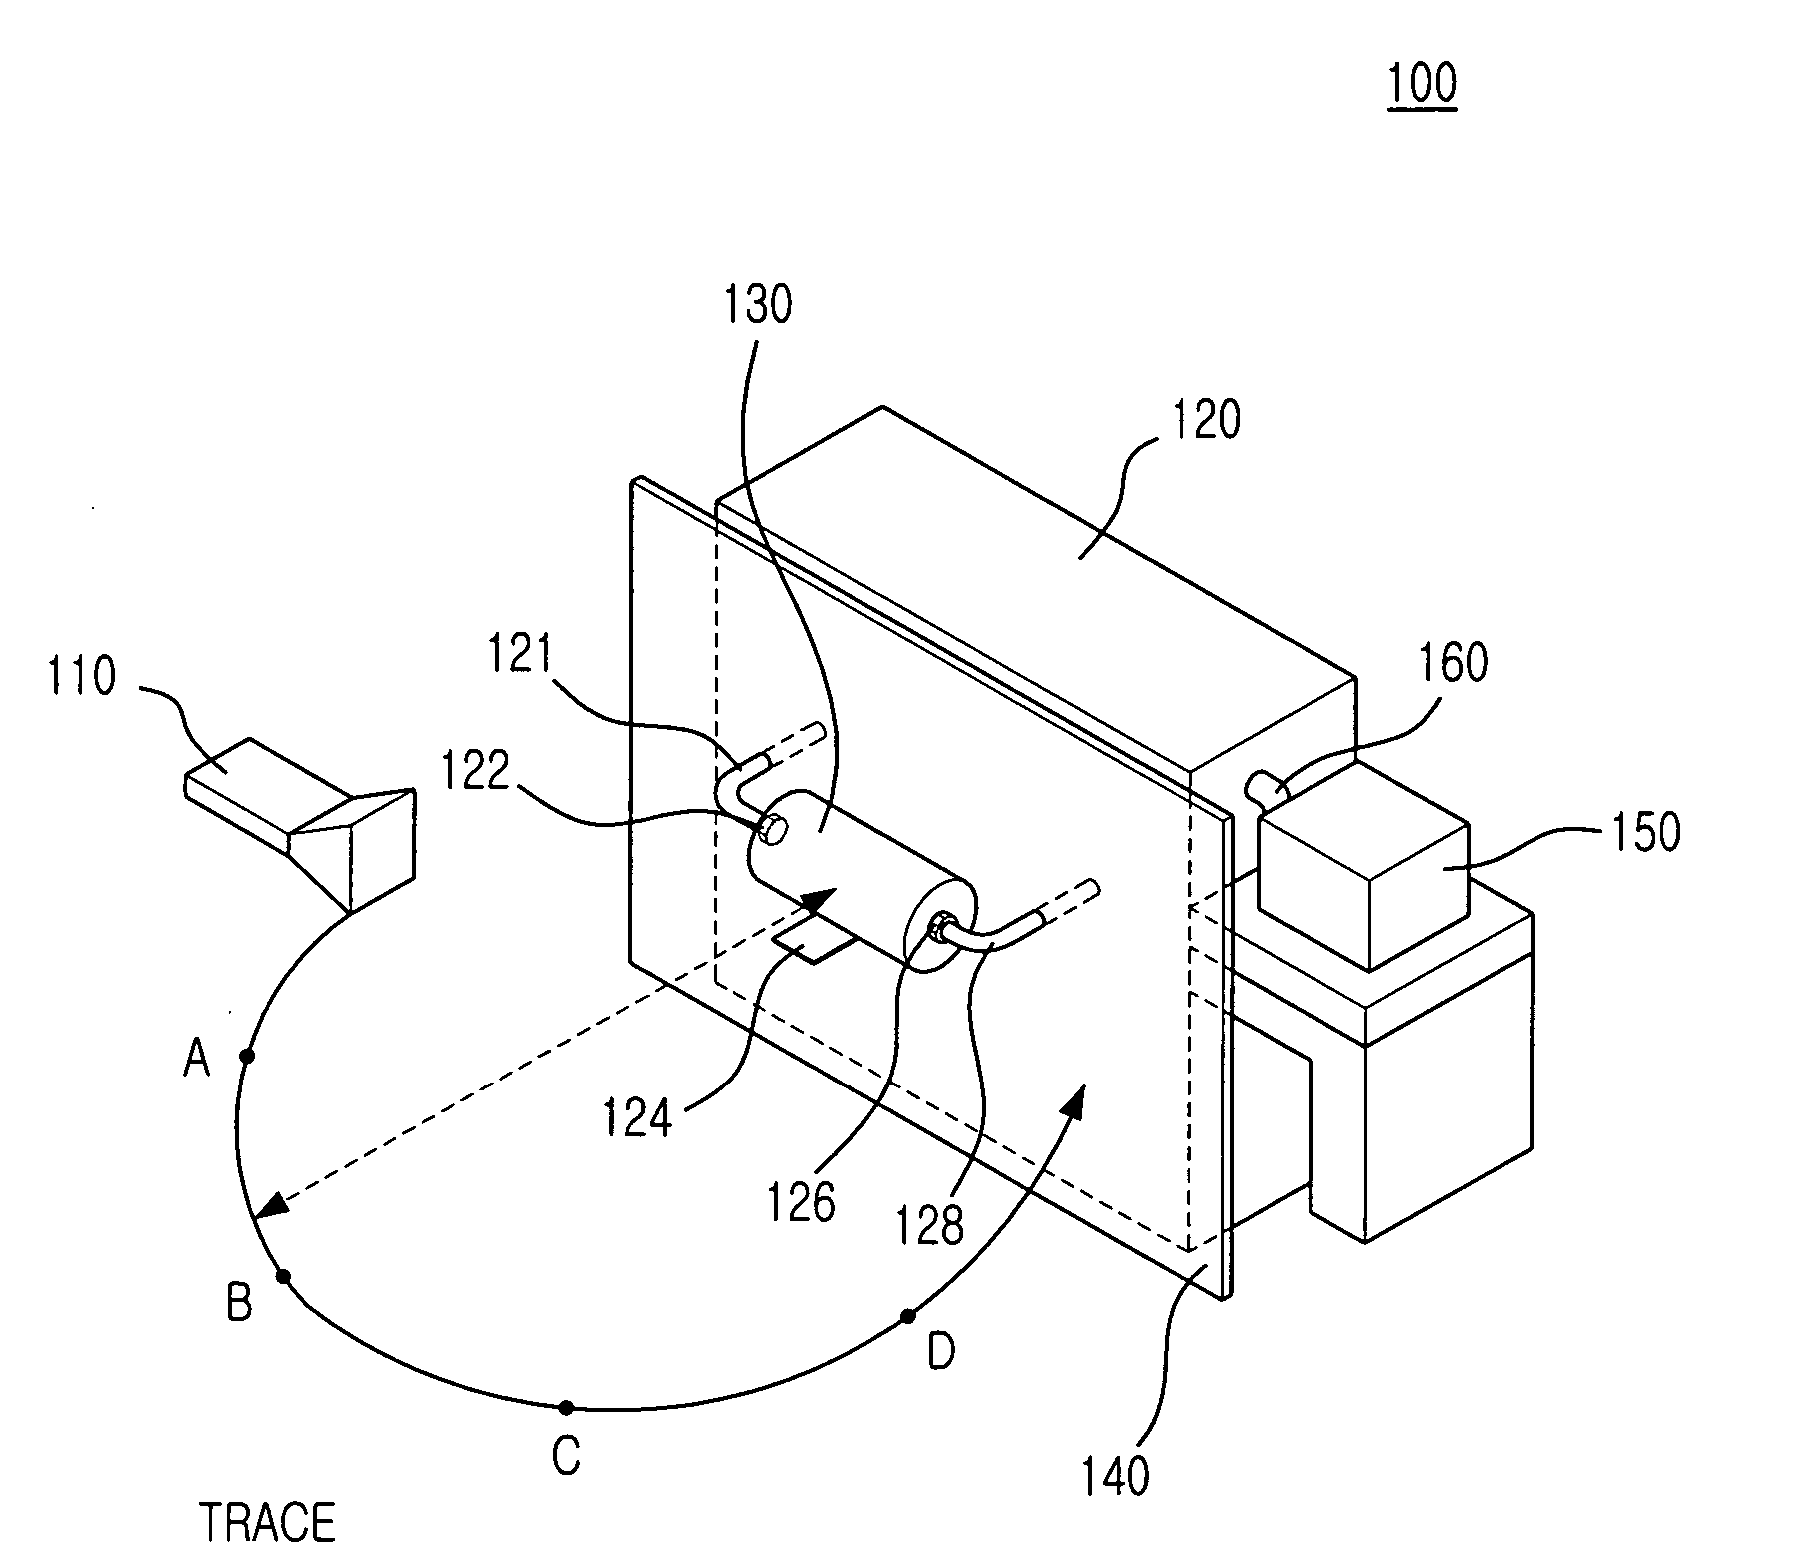 Apparatus and method for measuring EMI level of electronic device